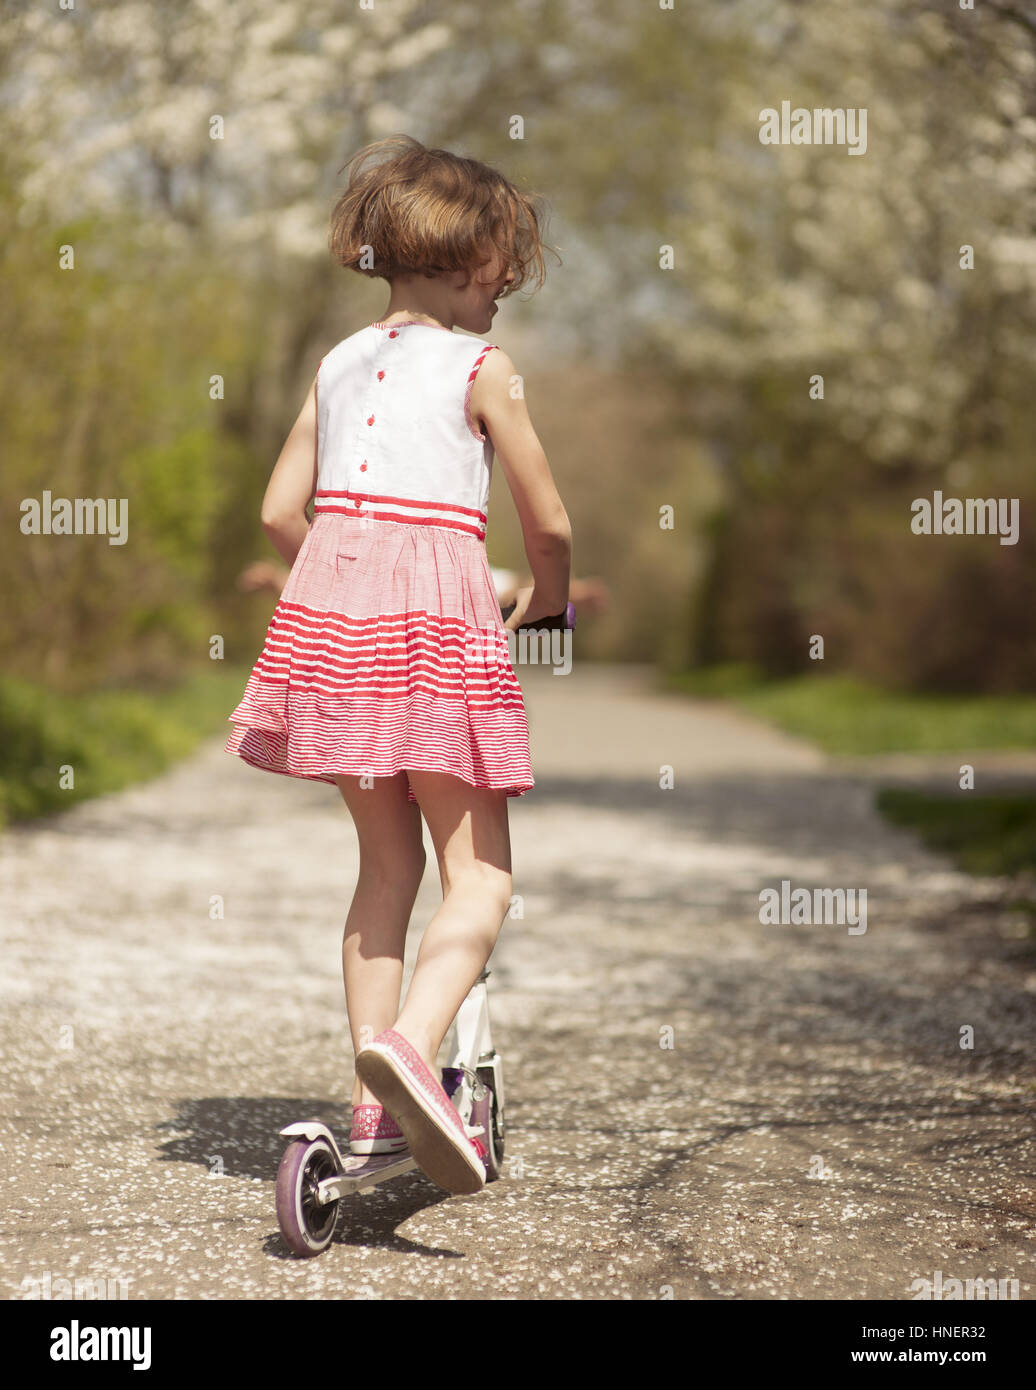 Young girl riding scooter away from camera on path through park Stock Photo